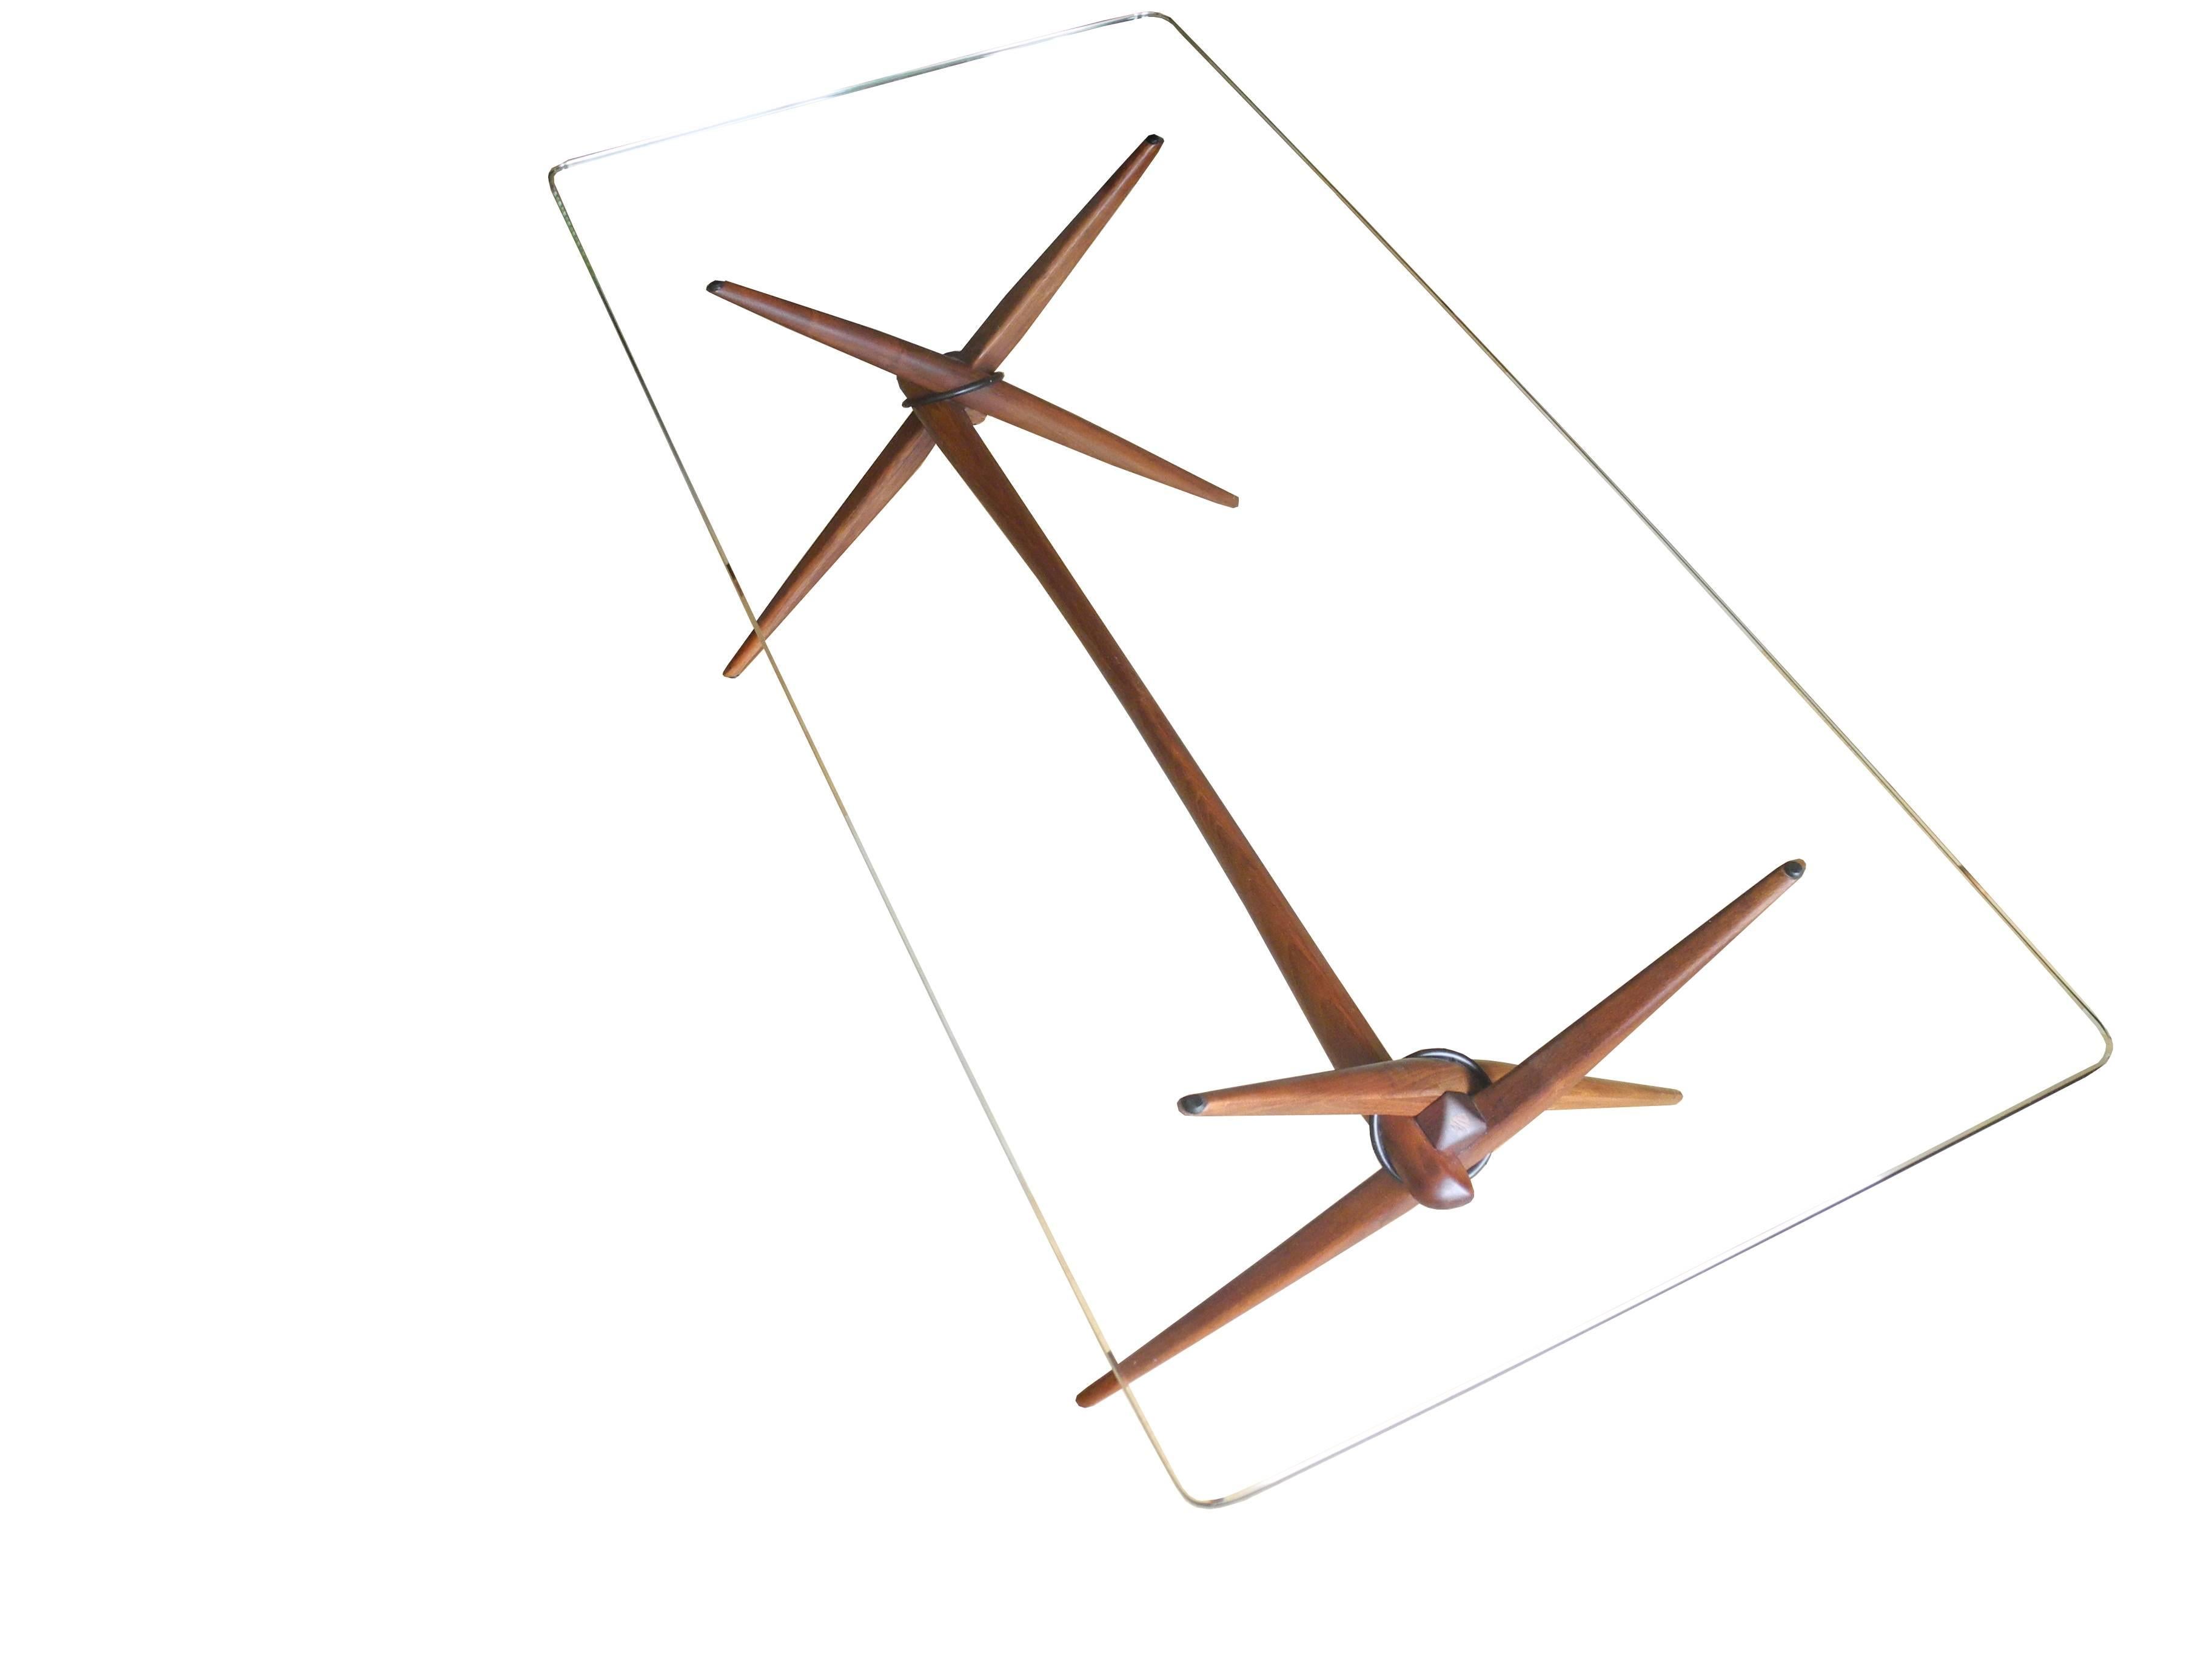 This 1950s walnut coffee table designed by Guy Barker is a sculptural design original. Using a metal ring, three arms, a nut and a bow centre bar the design is delicate yet withstands a lot of weight. This piece was found it its original condition